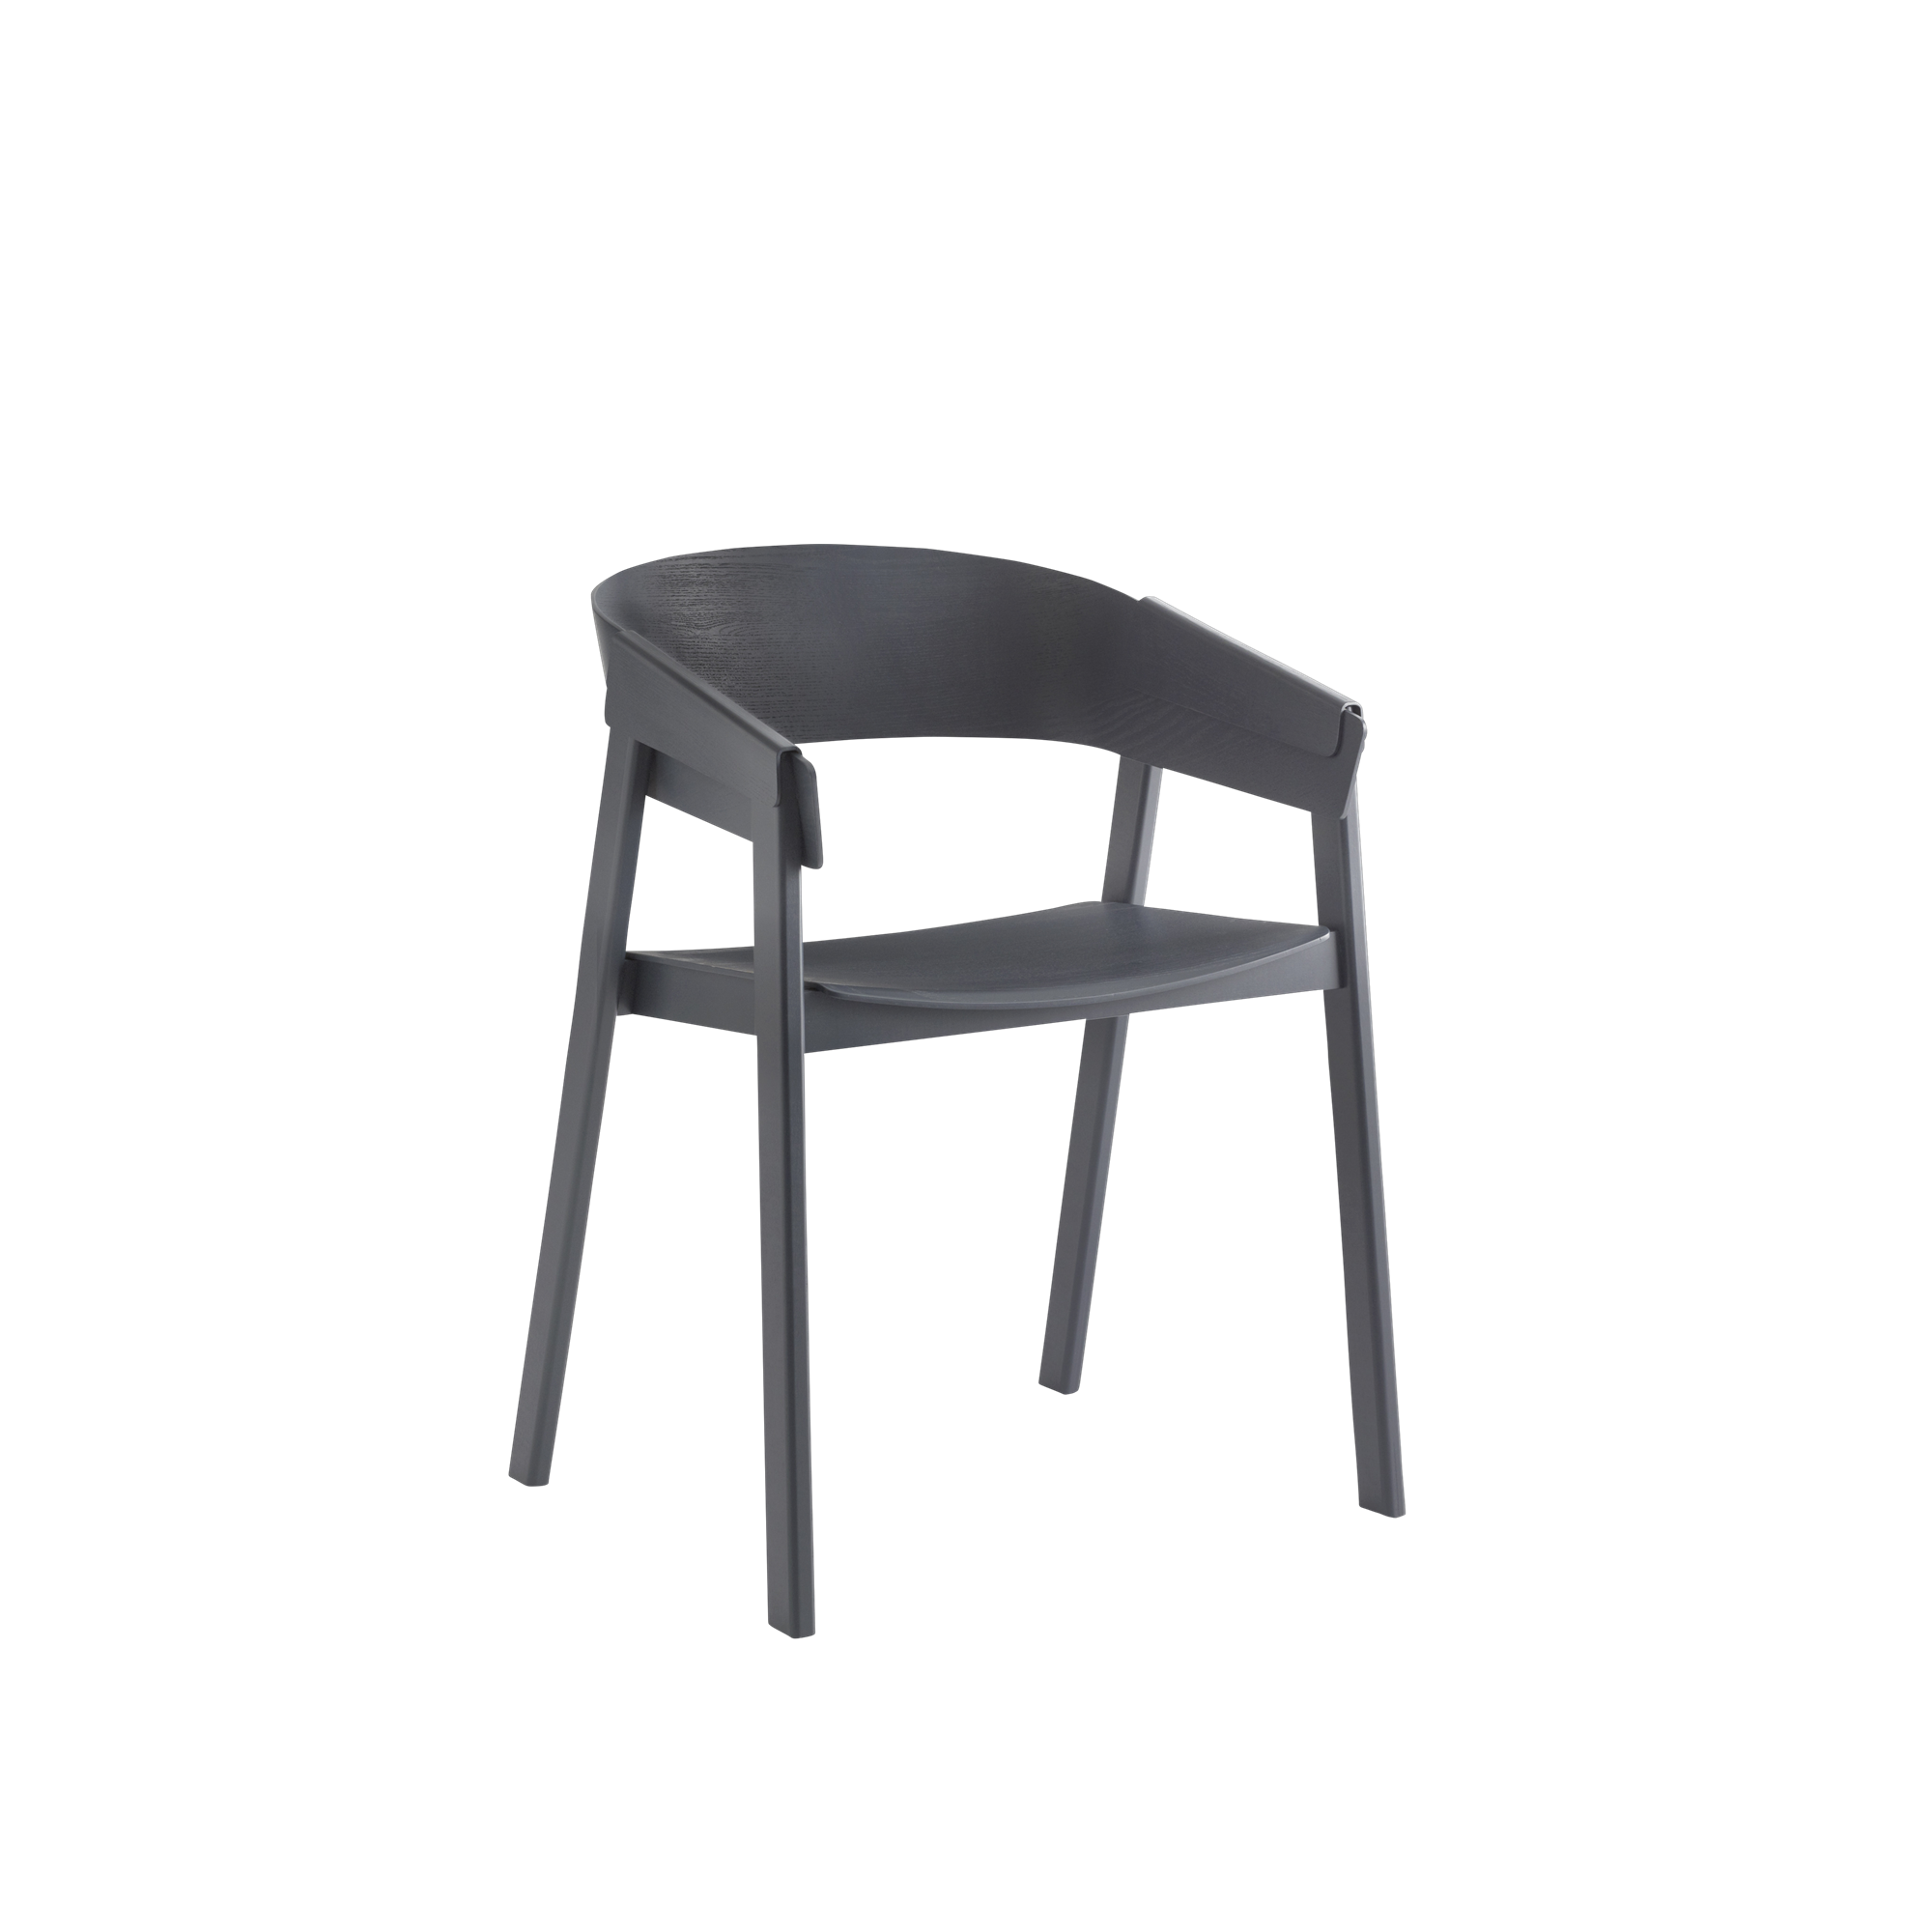 Cover Chair Black PNG Image